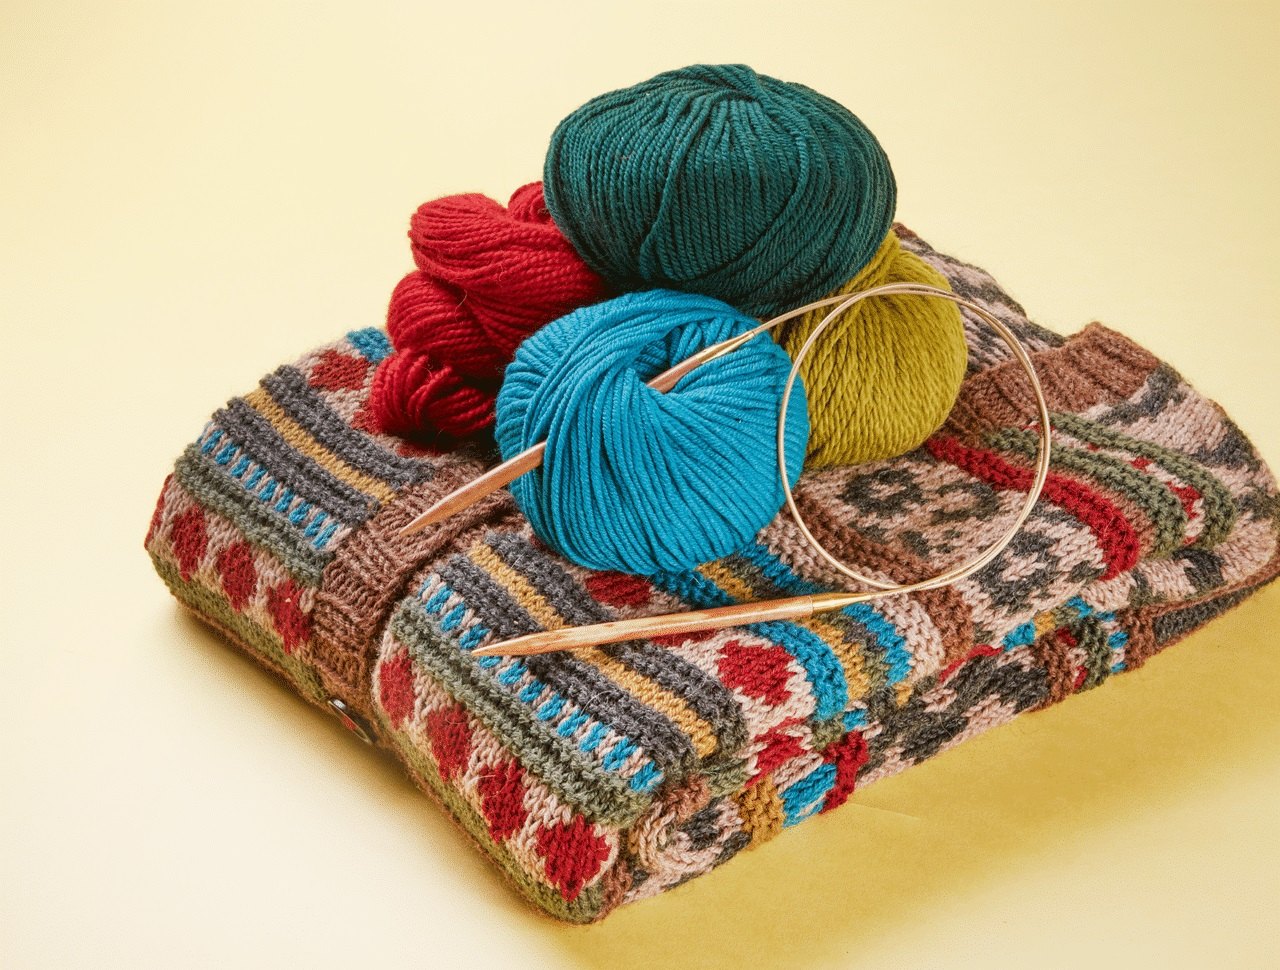 12-astonishing-facts-about-knitting-for-needy